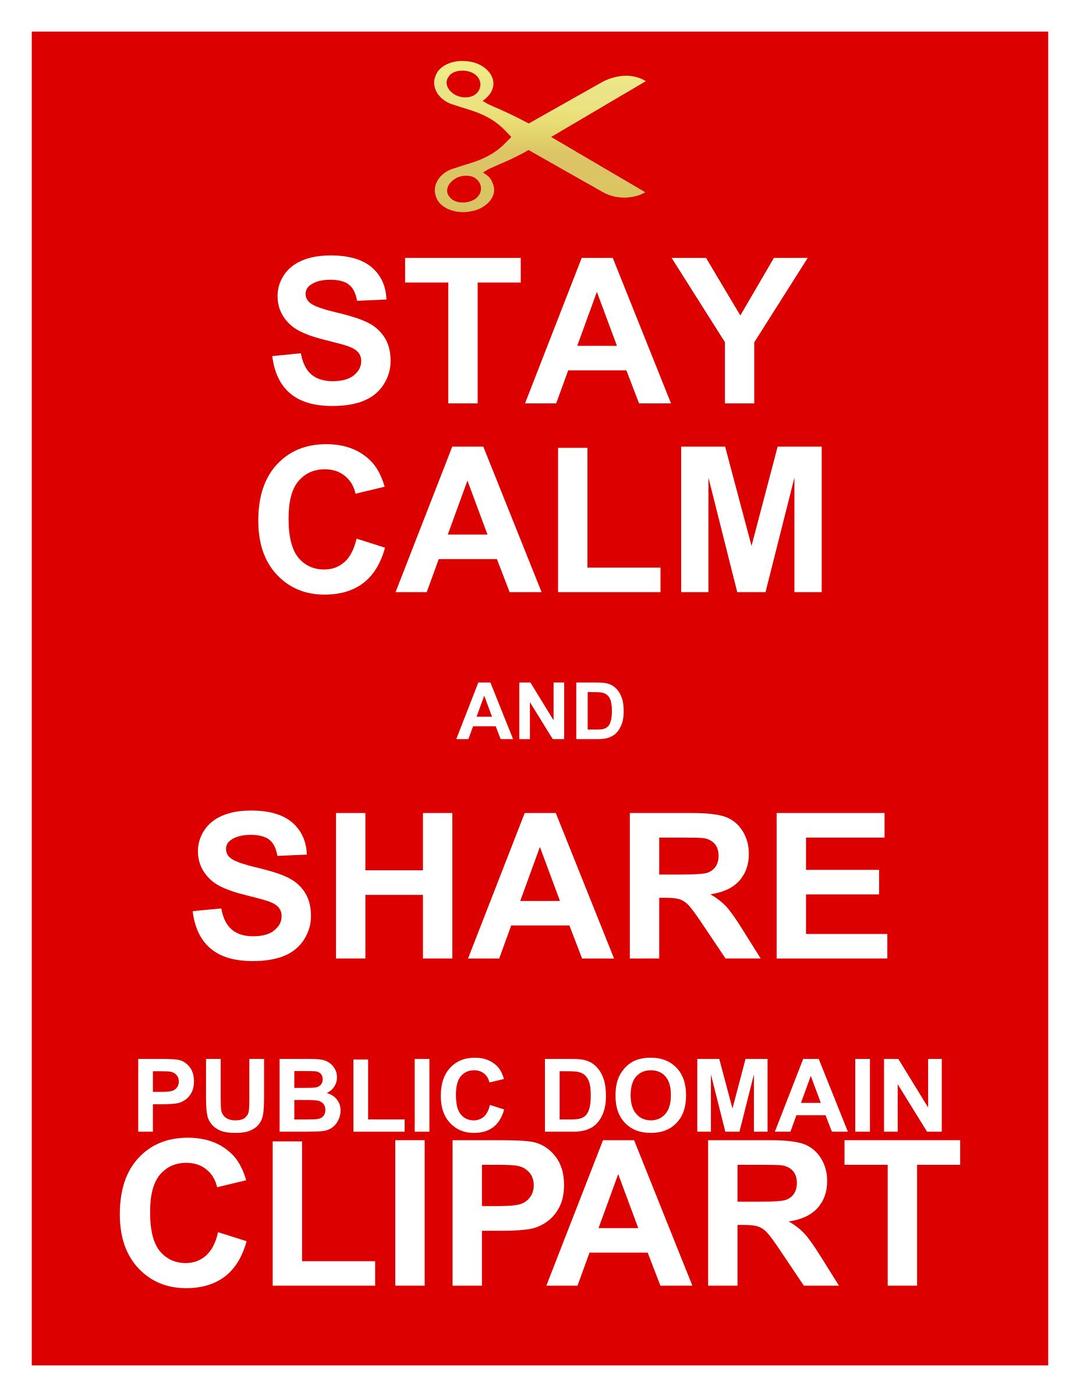 Share Clipart Sign png transparent